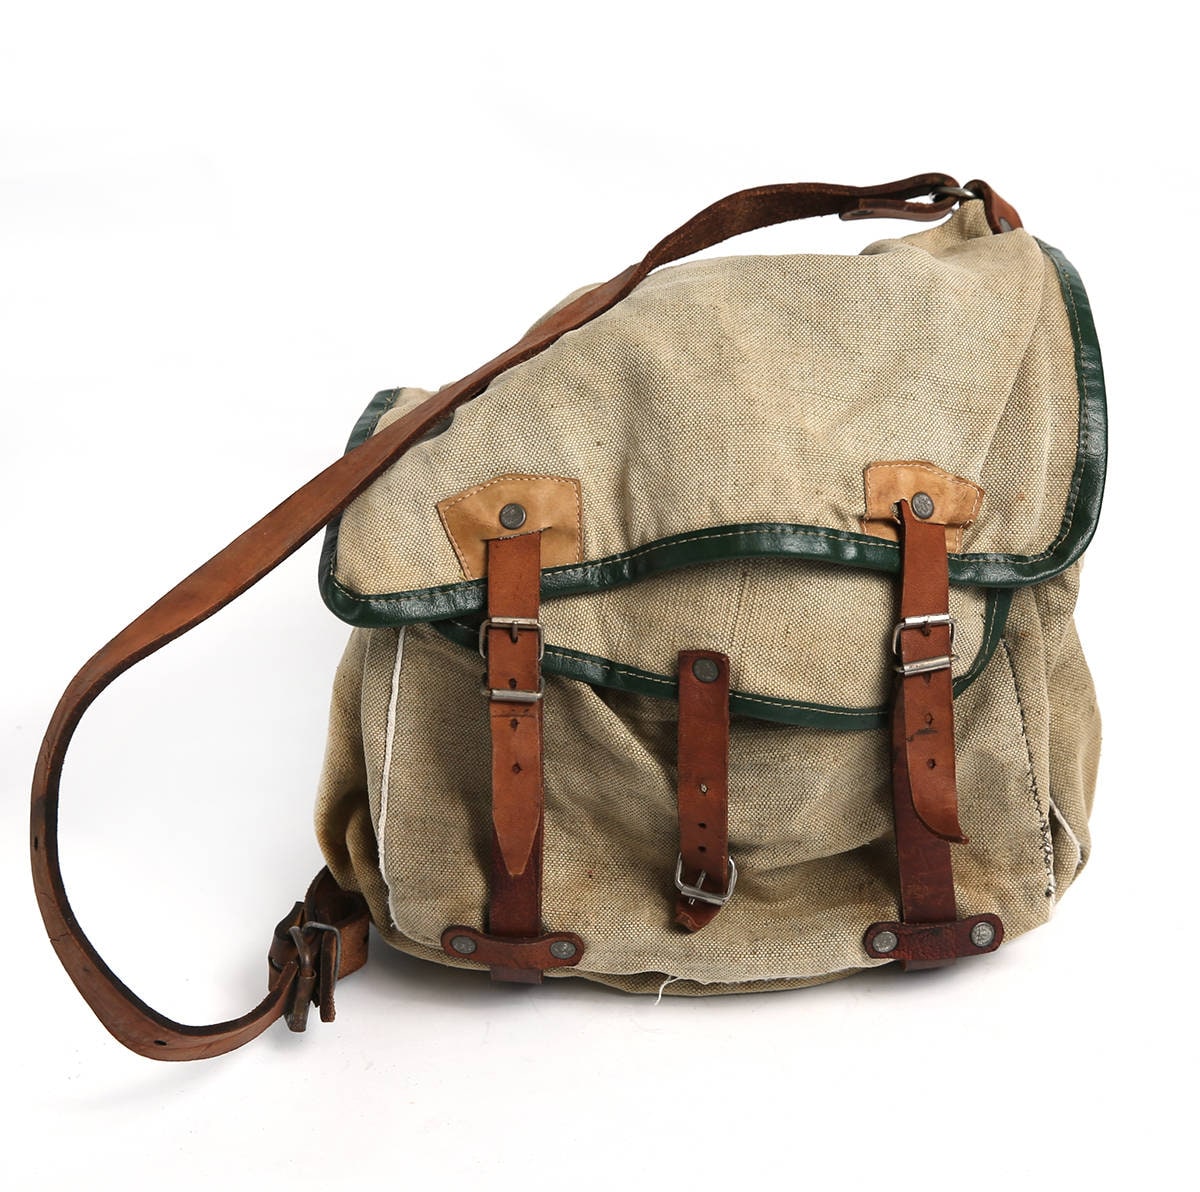 Distressed Canvas Leather Military Bag Green Messenger